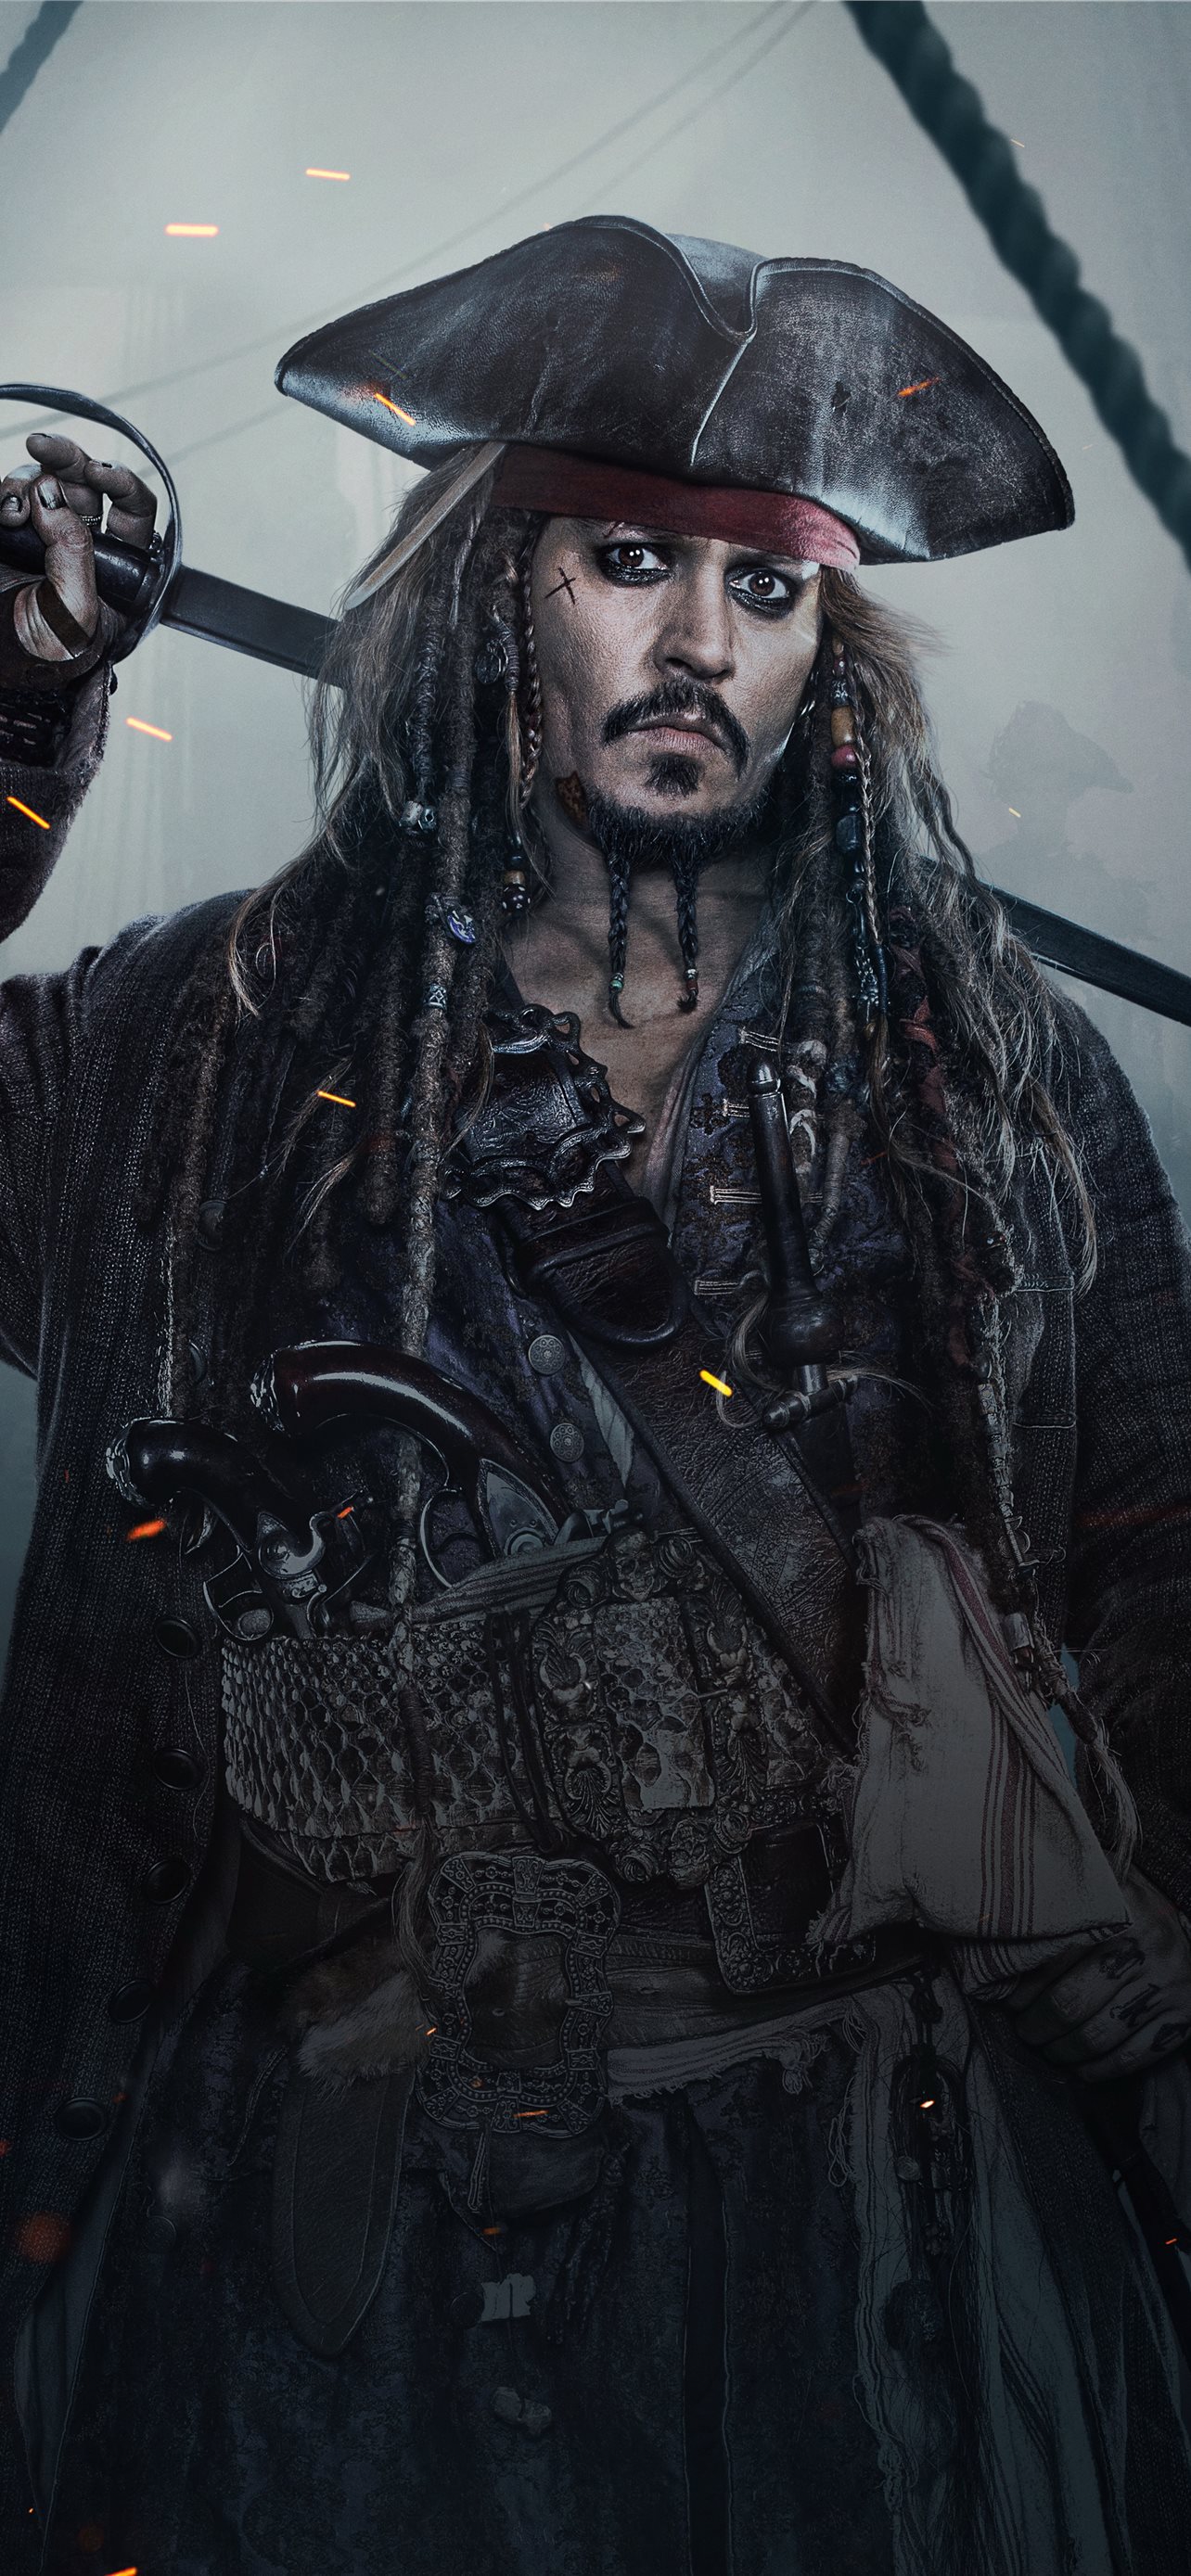 jack sparrow wallpaper by Tabler  Download on ZEDGE  27e3